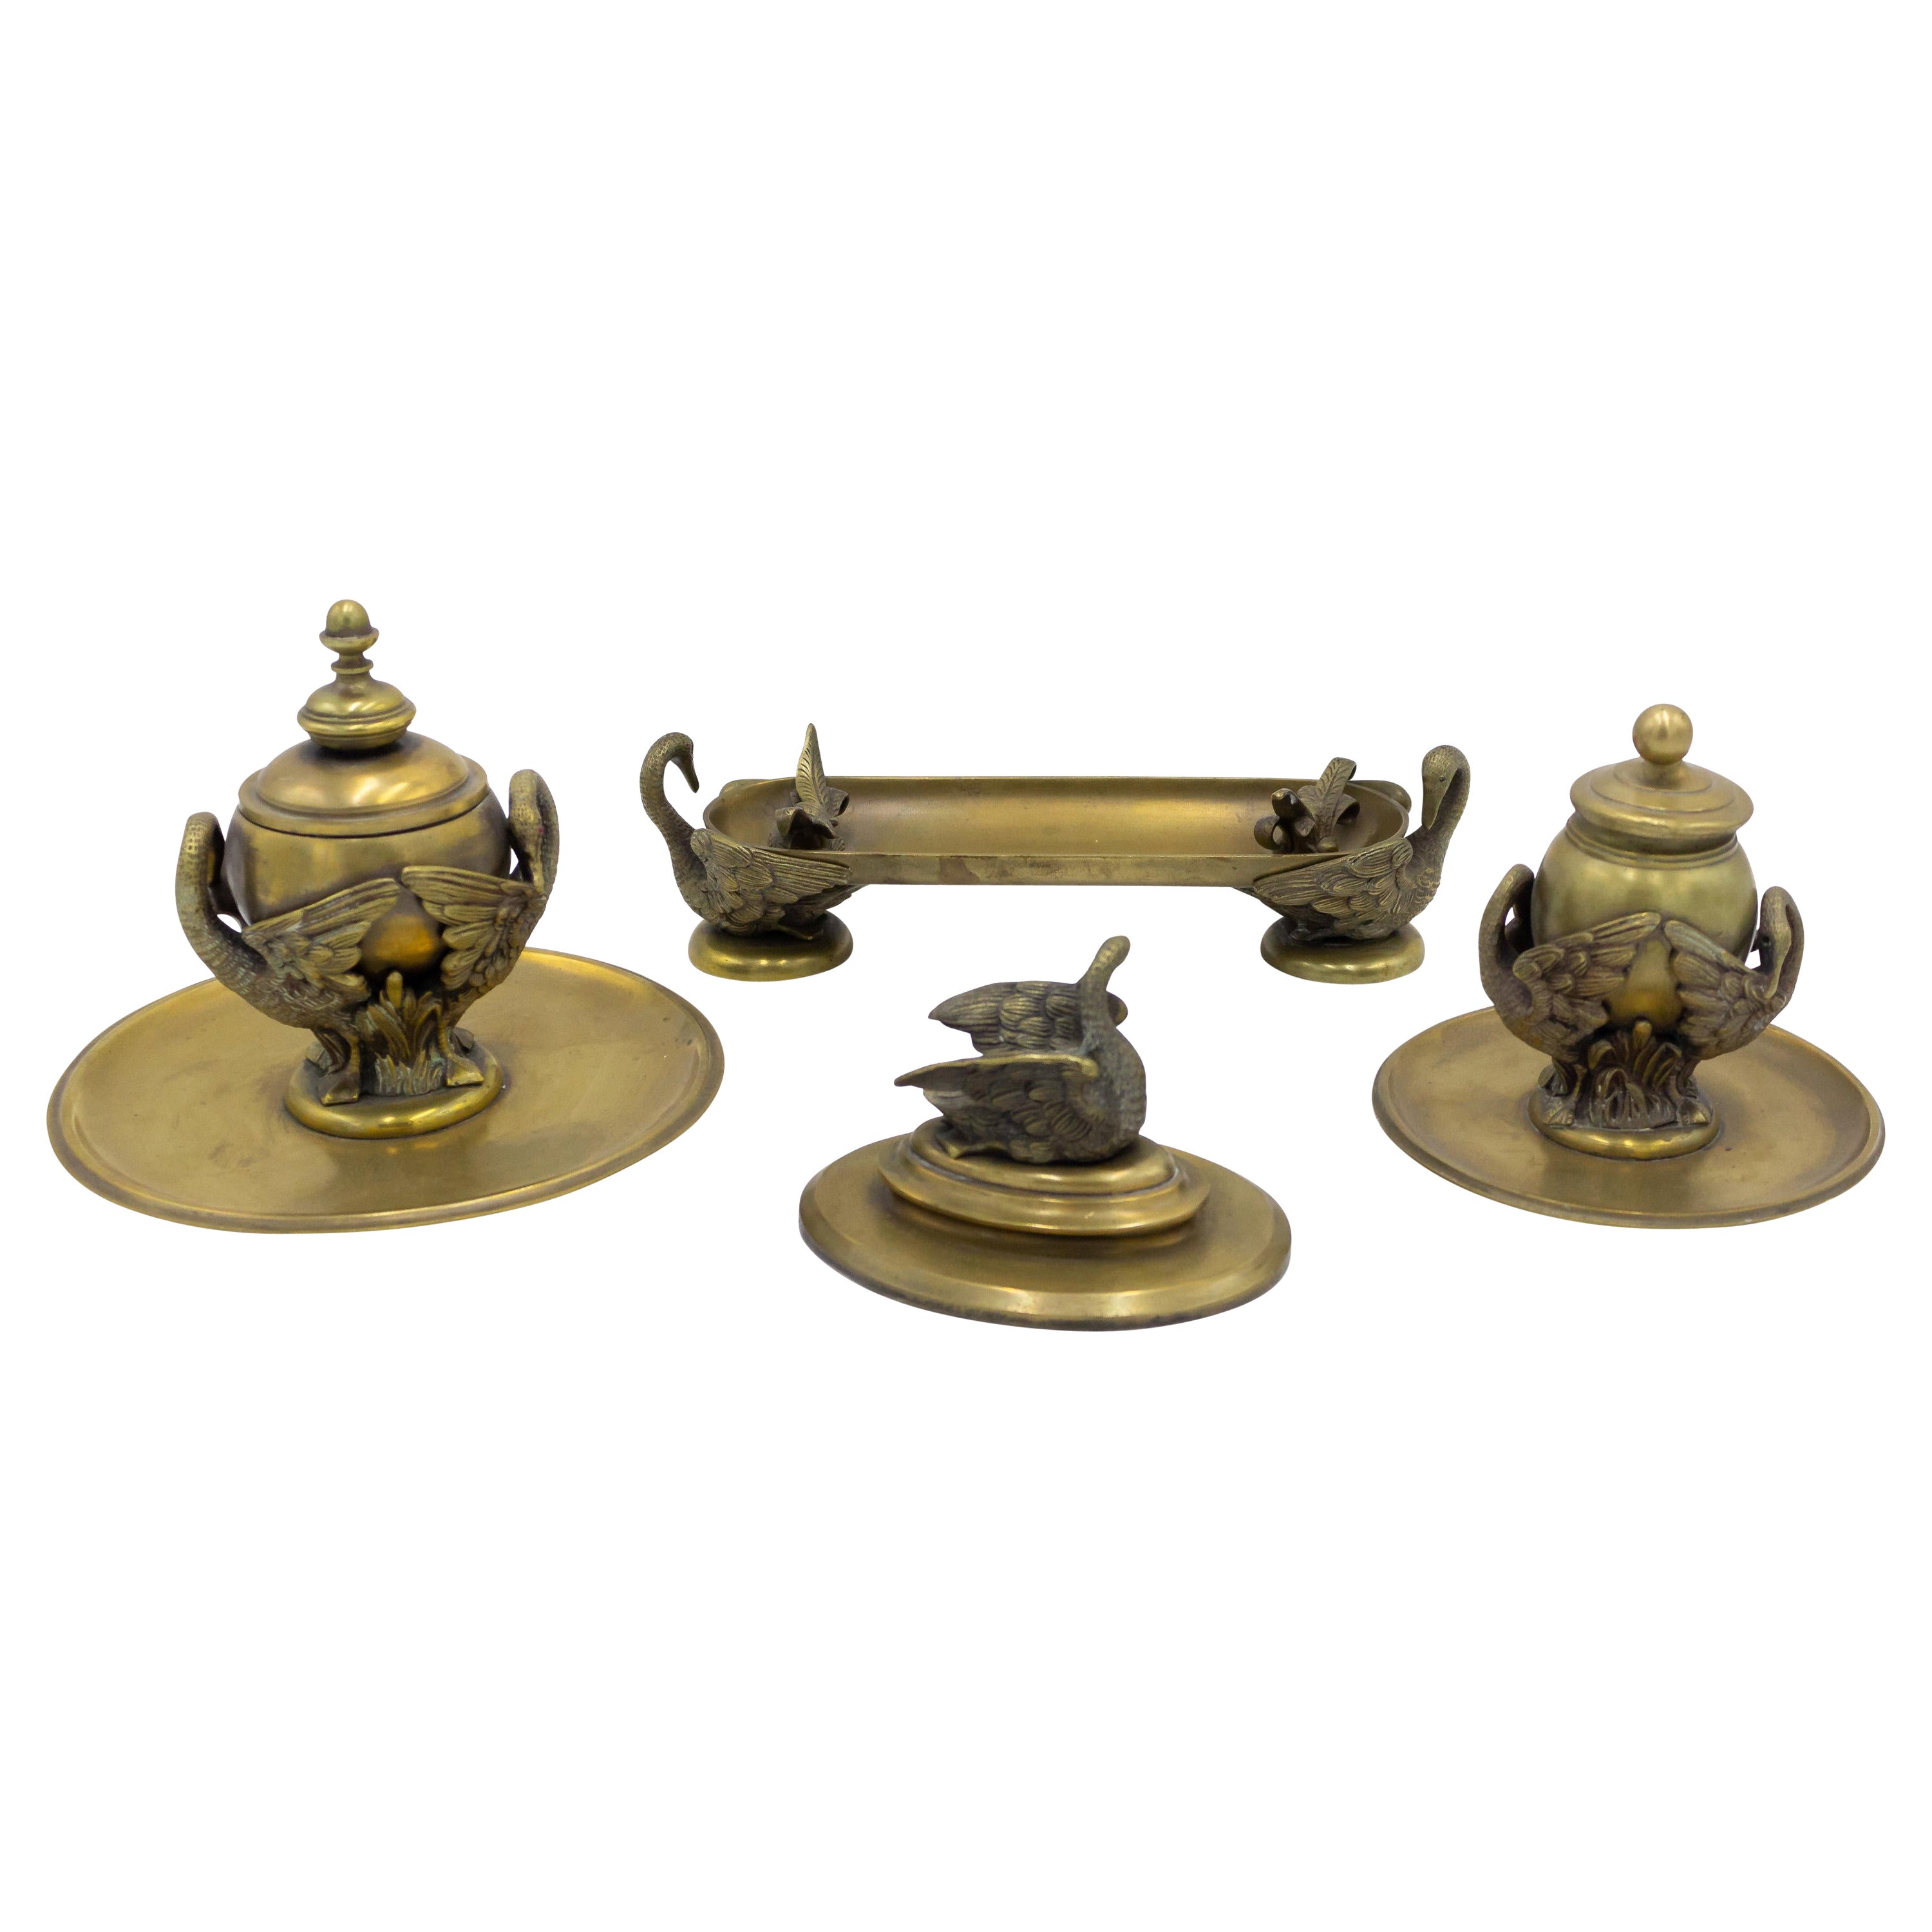 4-Piece French Empire Bronze Inkwell Set with Swan